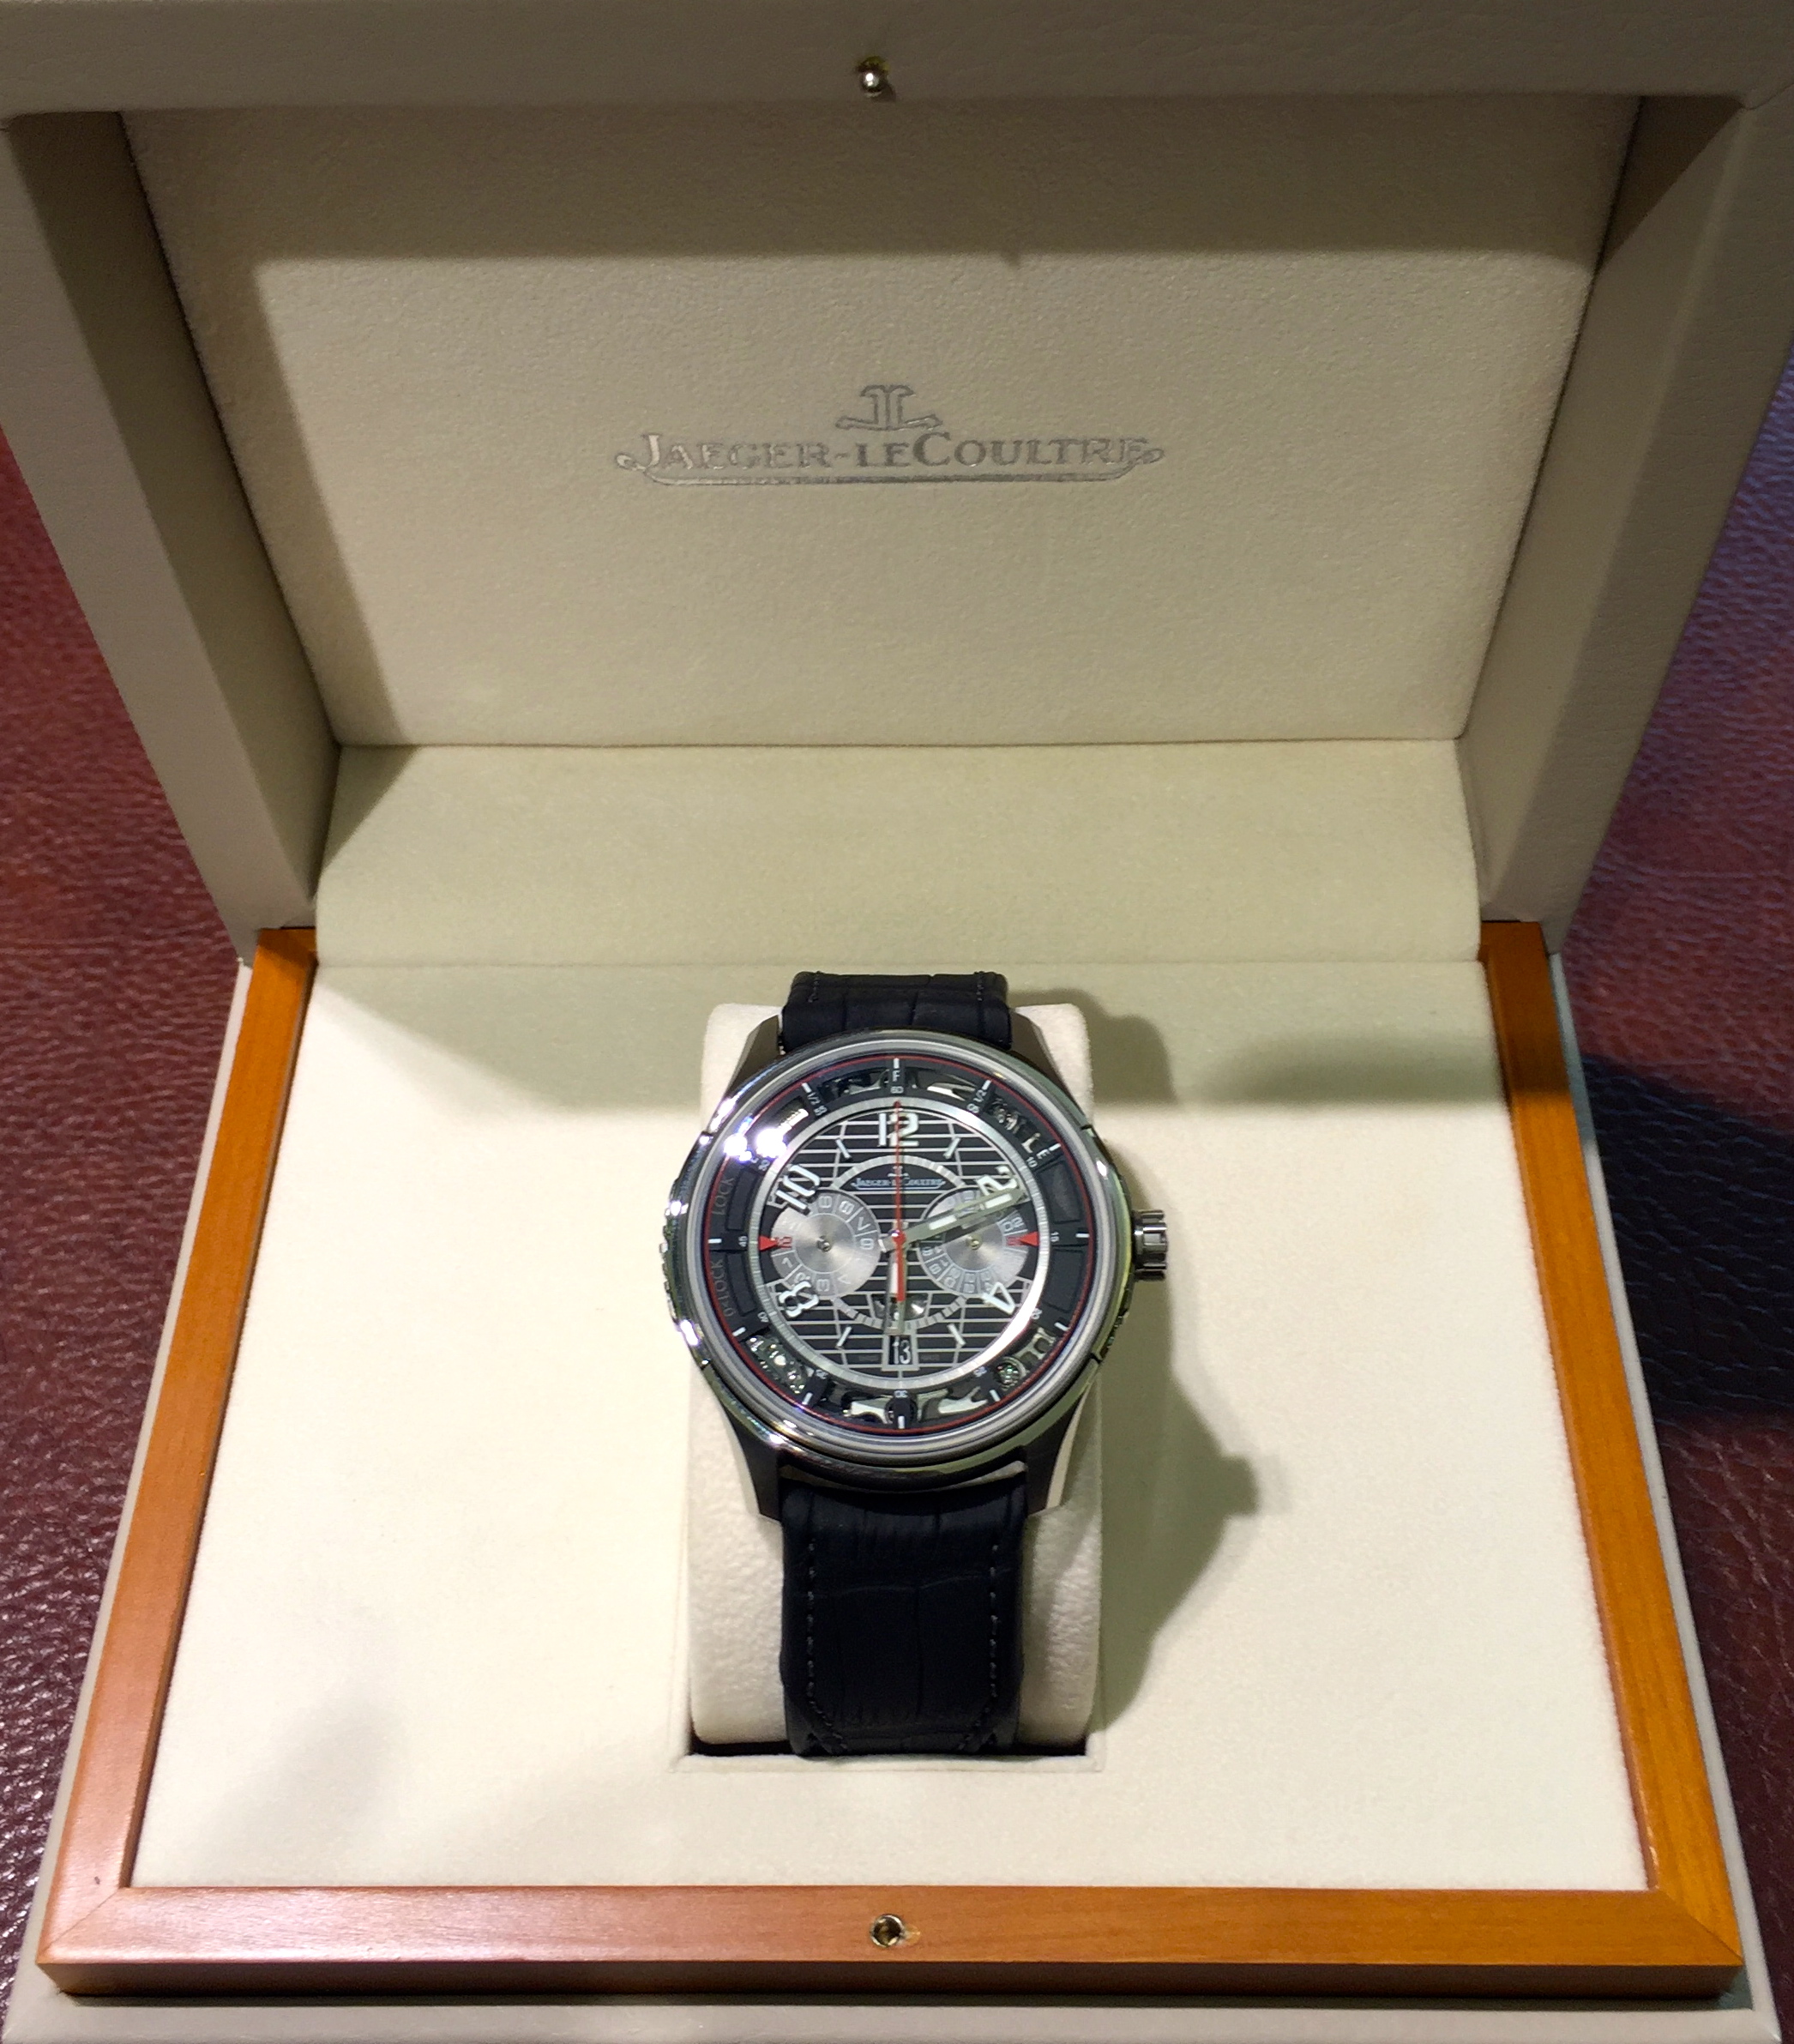 How is the JLC Amvox 2 DBS Chronograph as an investment? - Quora